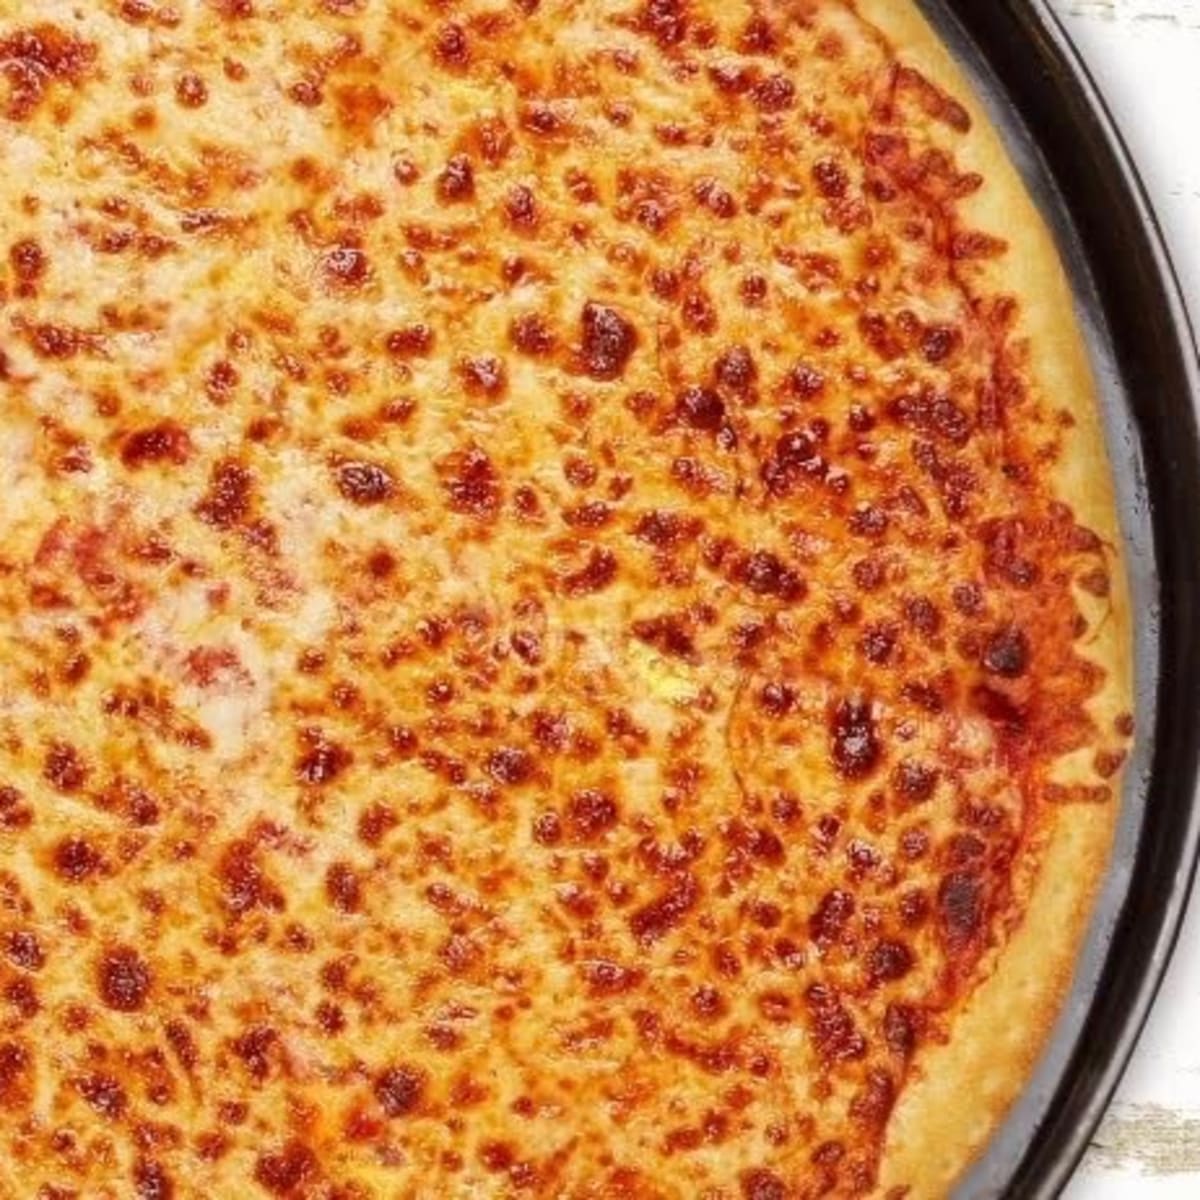 Costco Pizza Price: Value and Quality in Every Slice